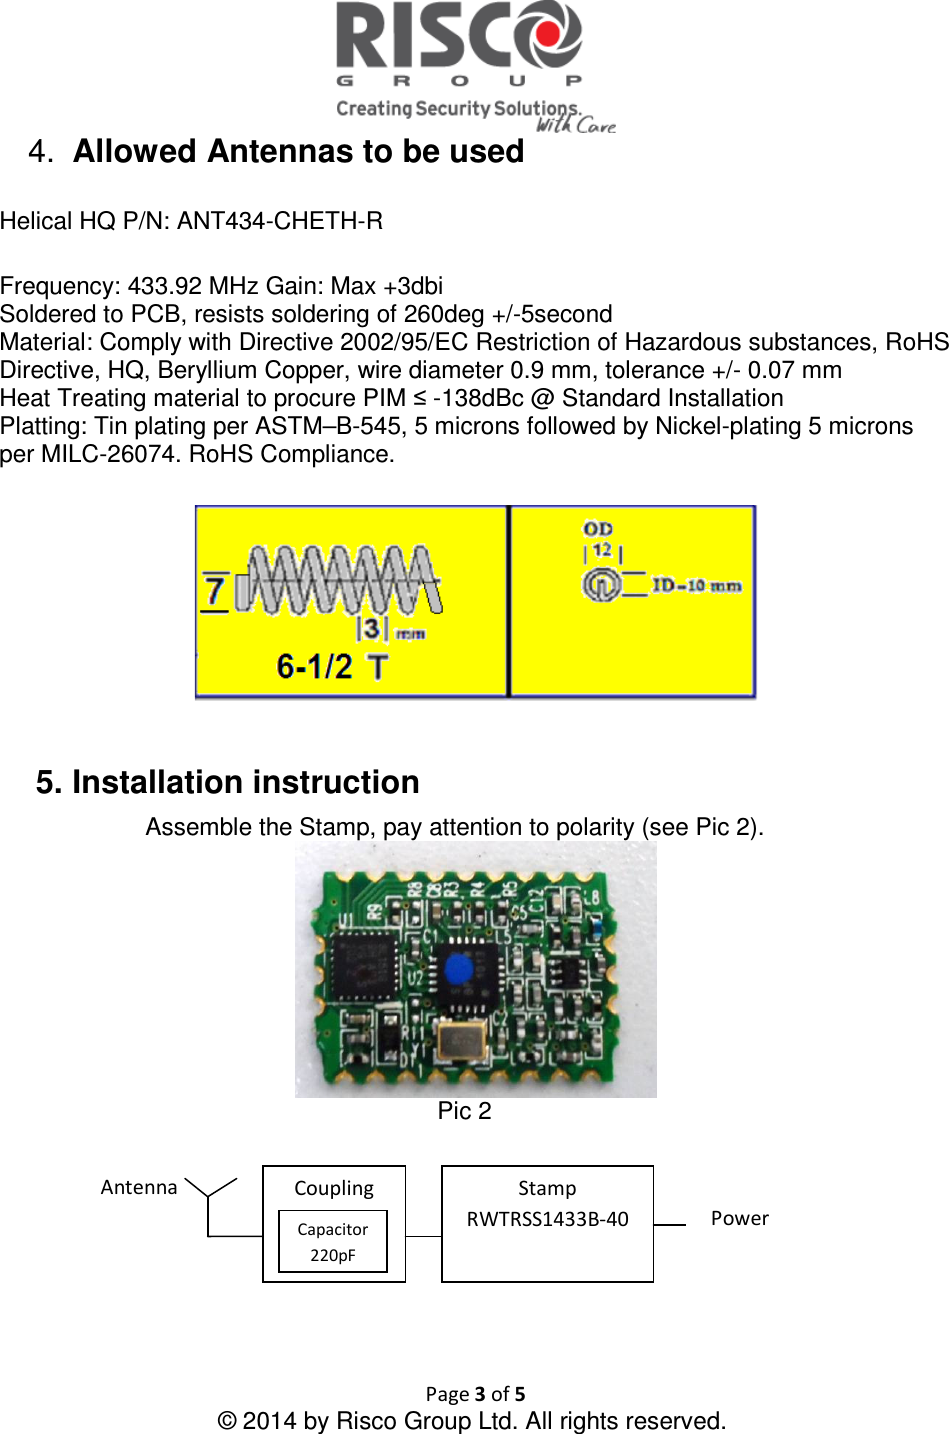  Page 3 of 5 © 2014 by Risco Group Ltd. All rights reserved.  4.  Allowed Antennas to be used   Helical HQ P/N: ANT434-CHETH-R  Frequency: 433.92 MHz Gain: Max +3dbi Soldered to PCB, resists soldering of 260deg +/-5second Material: Comply with Directive 2002/95/EC Restriction of Hazardous substances, RoHS Directive, HQ, Beryllium Copper, wire diameter 0.9 mm, tolerance +/- 0.07 mm Heat Treating material to procure PIM ≤ -138dBc @ Standard Installation Platting: Tin plating per ASTM–B-545, 5 microns followed by Nickel-plating 5 microns per MILC-26074. RoHS Compliance.     5. Installation instruction  Assemble the Stamp, pay attention to polarity (see Pic 2).  Pic 2        Stamp RWTRSS1433B-40  Power Antenna Coupling Capacitor 220pF 